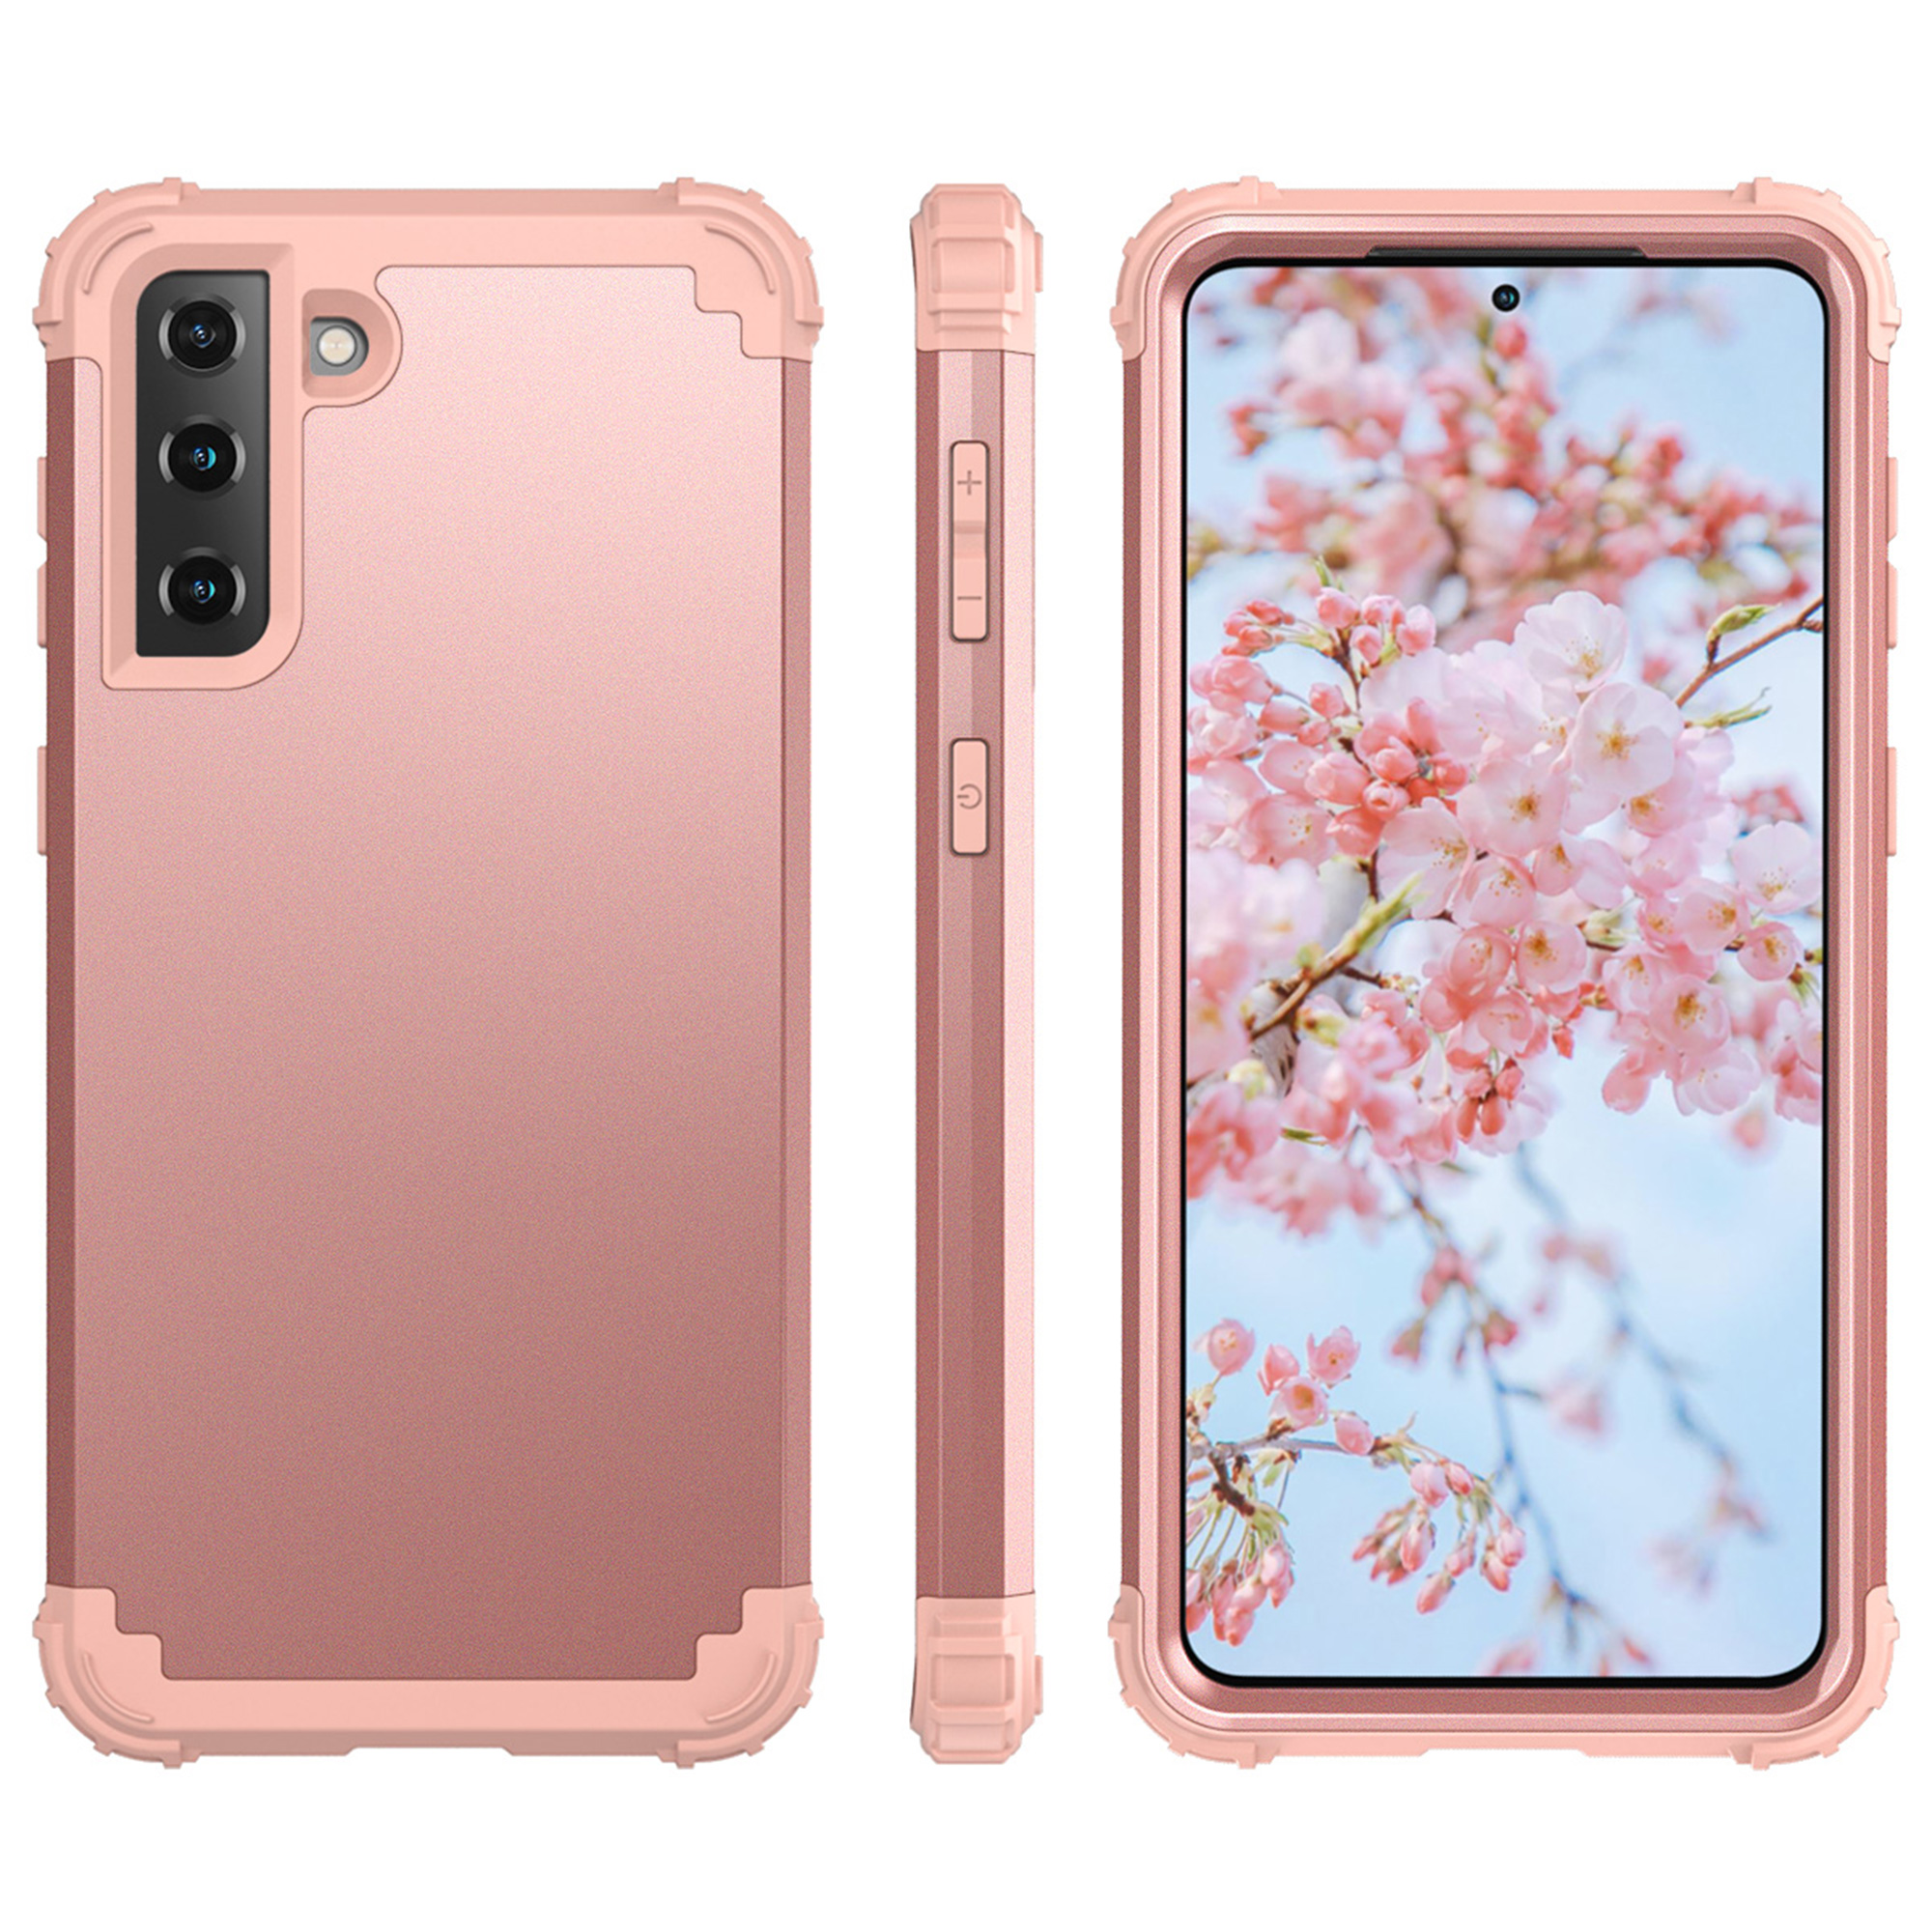 Samsung Galaxy S21+ Case, Dteck Heavy Hybrid Rugged Shockproof Case, Support Wireless Charging, 3 in 1 Full Protective Cover for Samsung Galaxy S21+/S21 Plus 5G, Rosegold - image 2 of 7